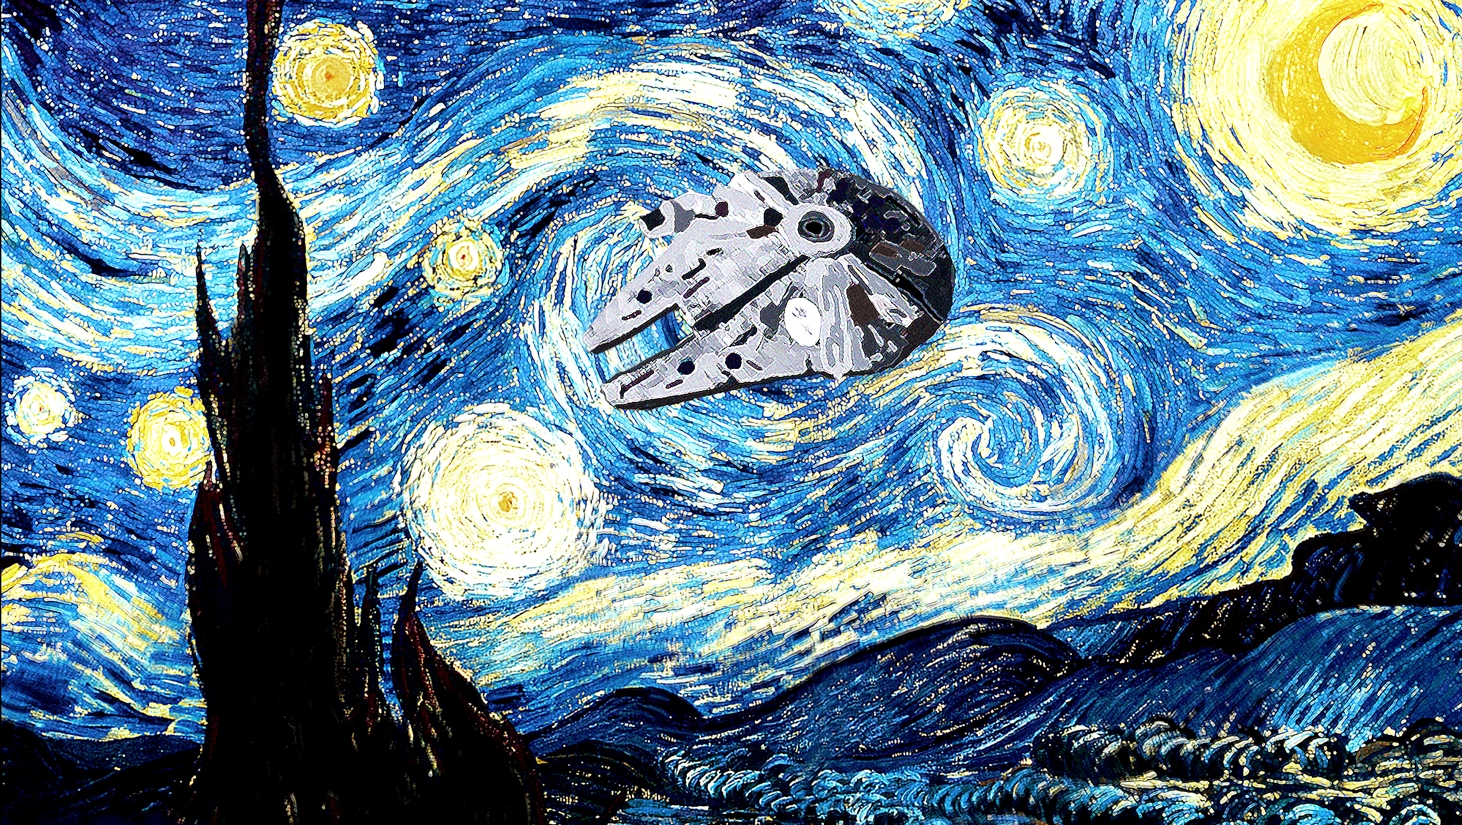 Starry_Night_with_Millennium_Falcon_by_Rabittooth